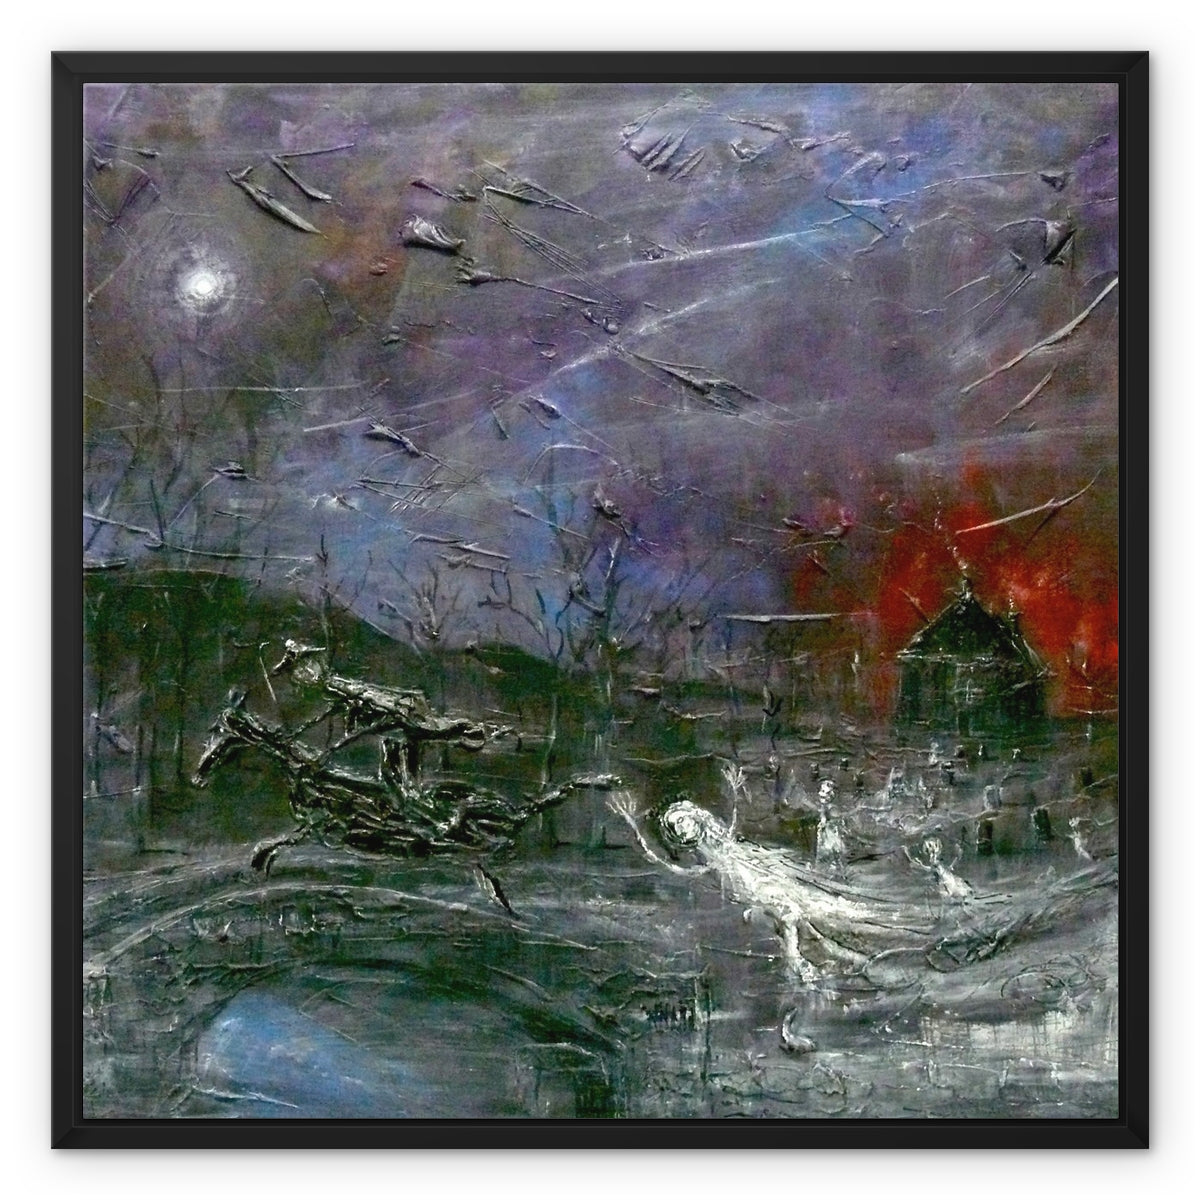 Tam O Shanter Painting | Framed Canvas From Scotland-Floating Framed Canvas Prints-Abstract & Impressionistic Art Gallery-24"x24"-Paintings, Prints, Homeware, Art Gifts From Scotland By Scottish Artist Kevin Hunter